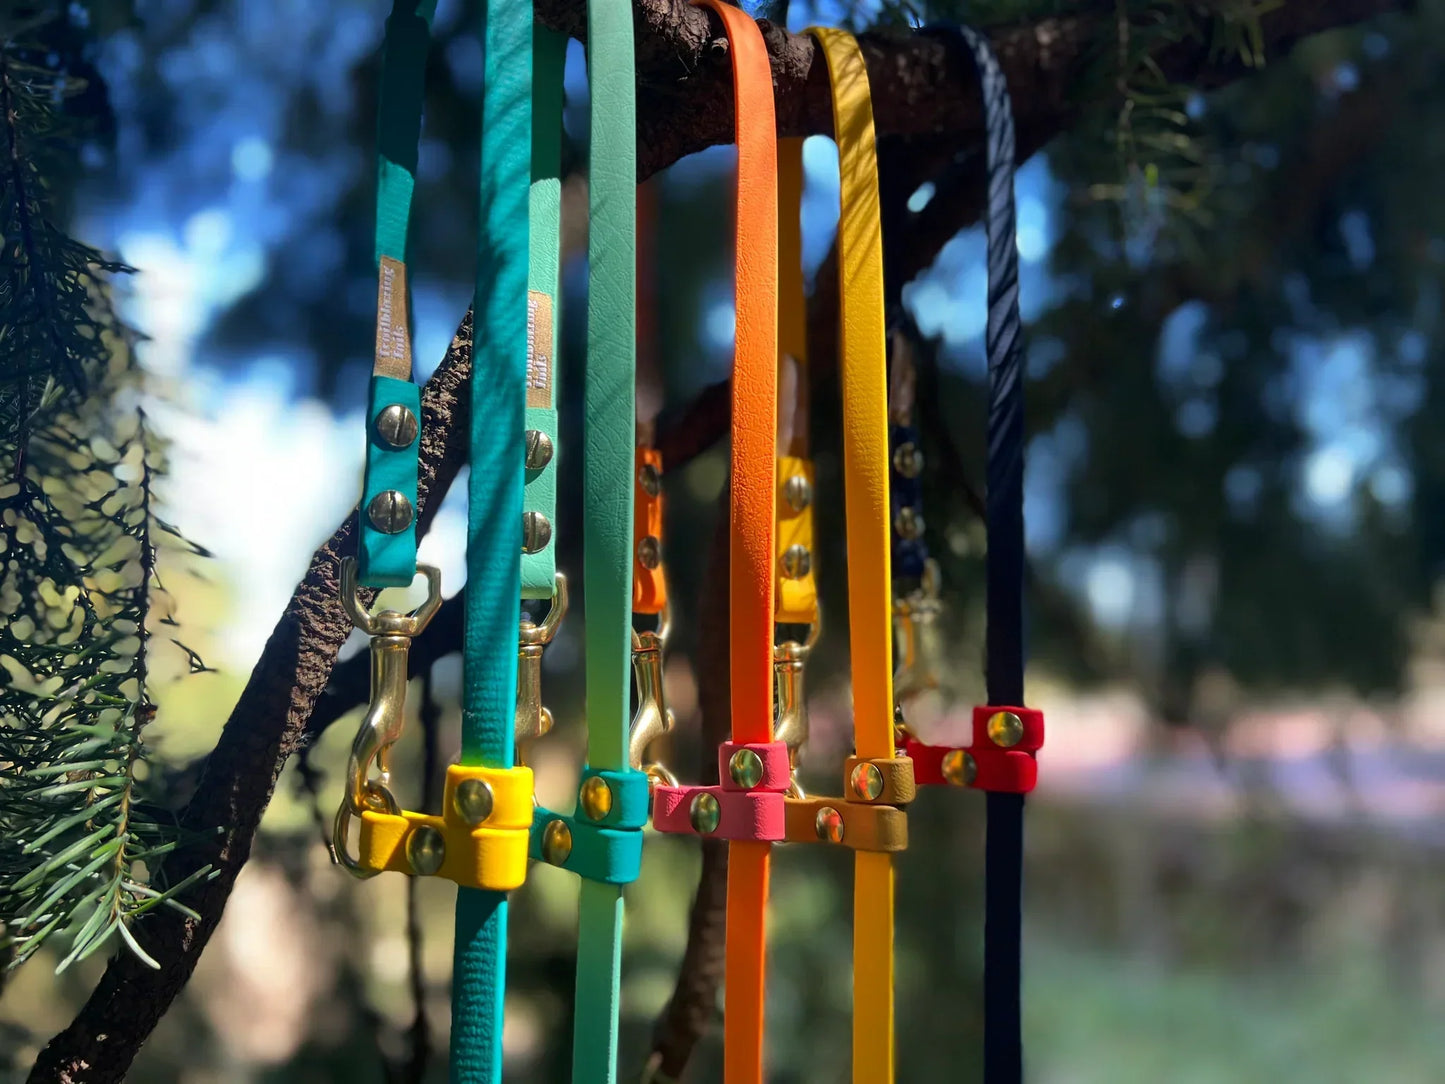 A group of colorful Your Whole Dog leashes hanging from a tree.